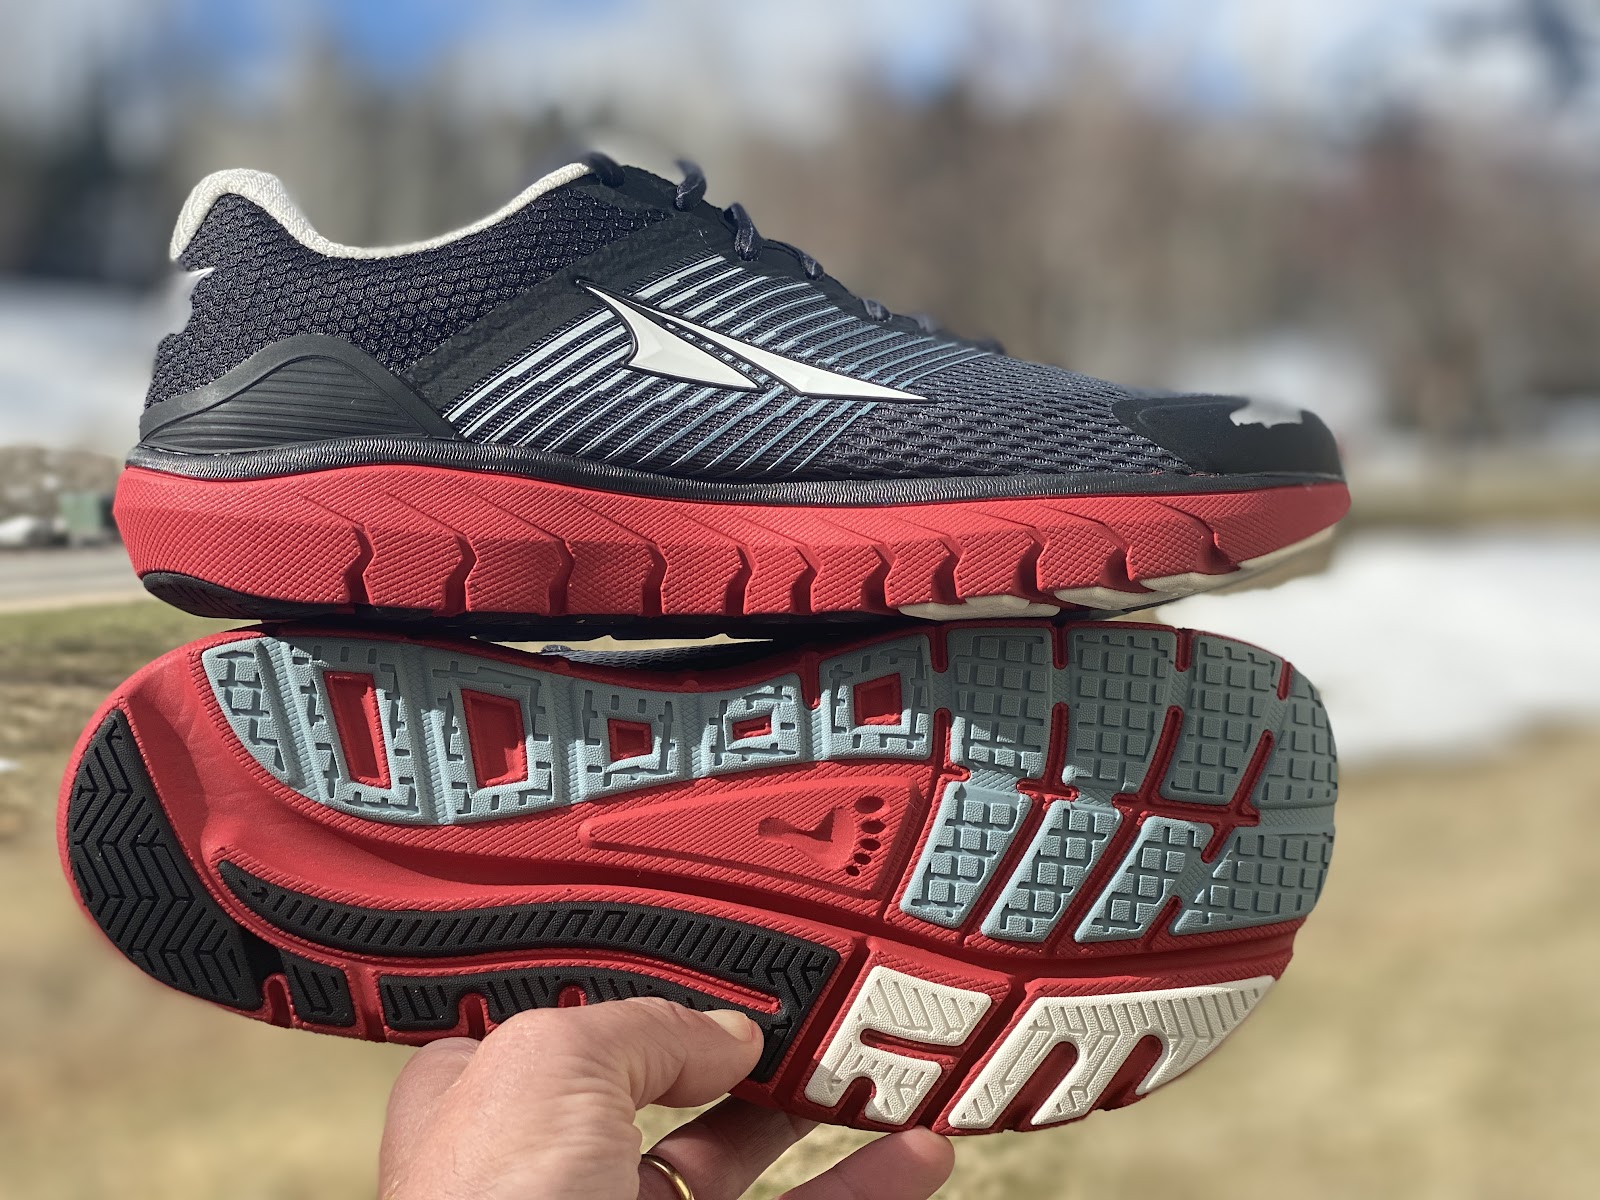 Altra Provision 4 Men's Road Running Shoes Black/Gray/Red 30% OFF Today Only! 